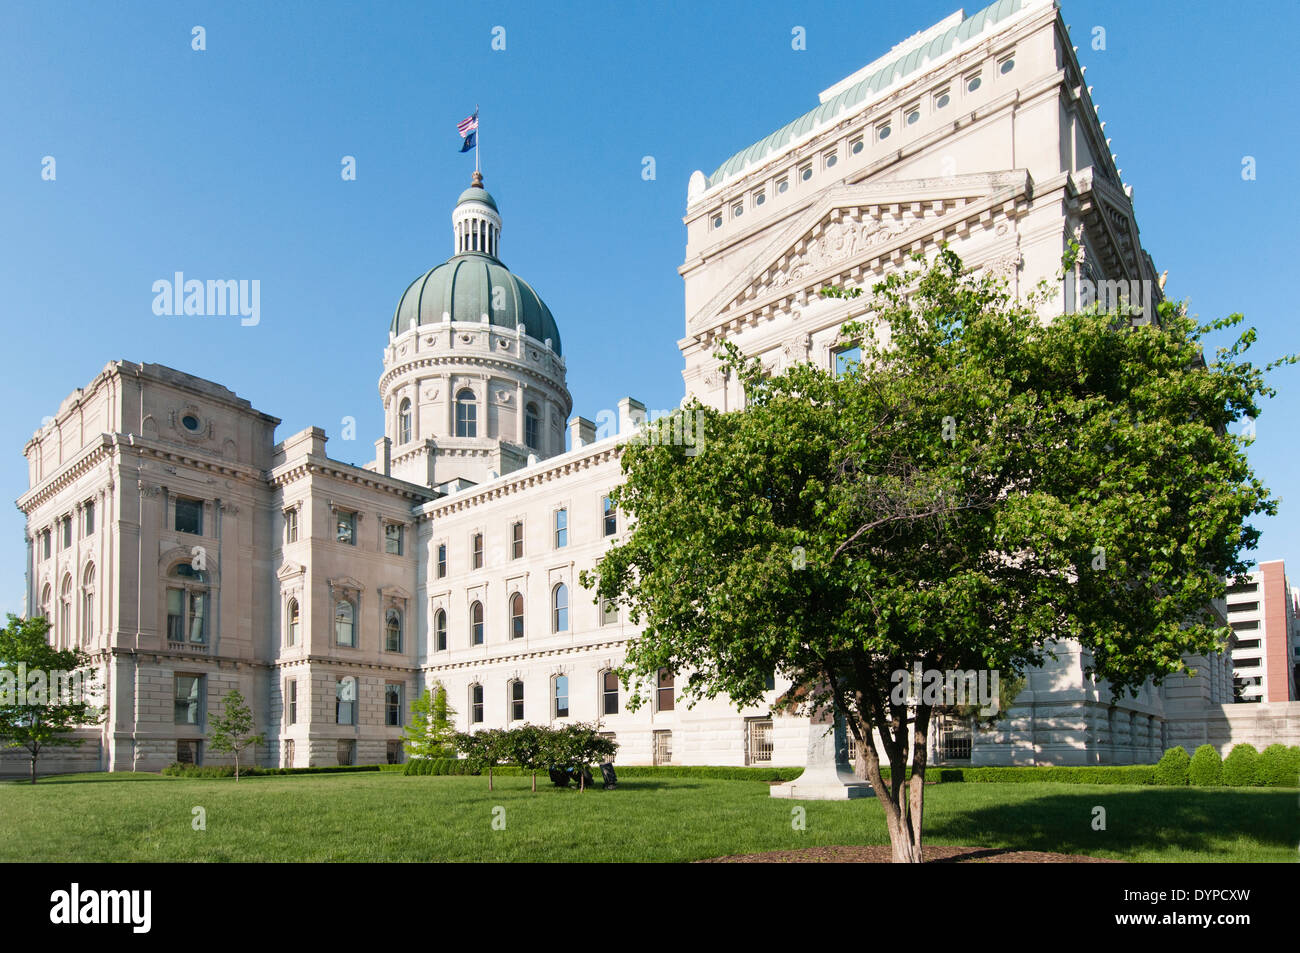 USA, Indiana, Indianapolis.  The Indiana Statehouse houses the General Assembly, Governors office and Supreme Court of Indiana. Stock Photo